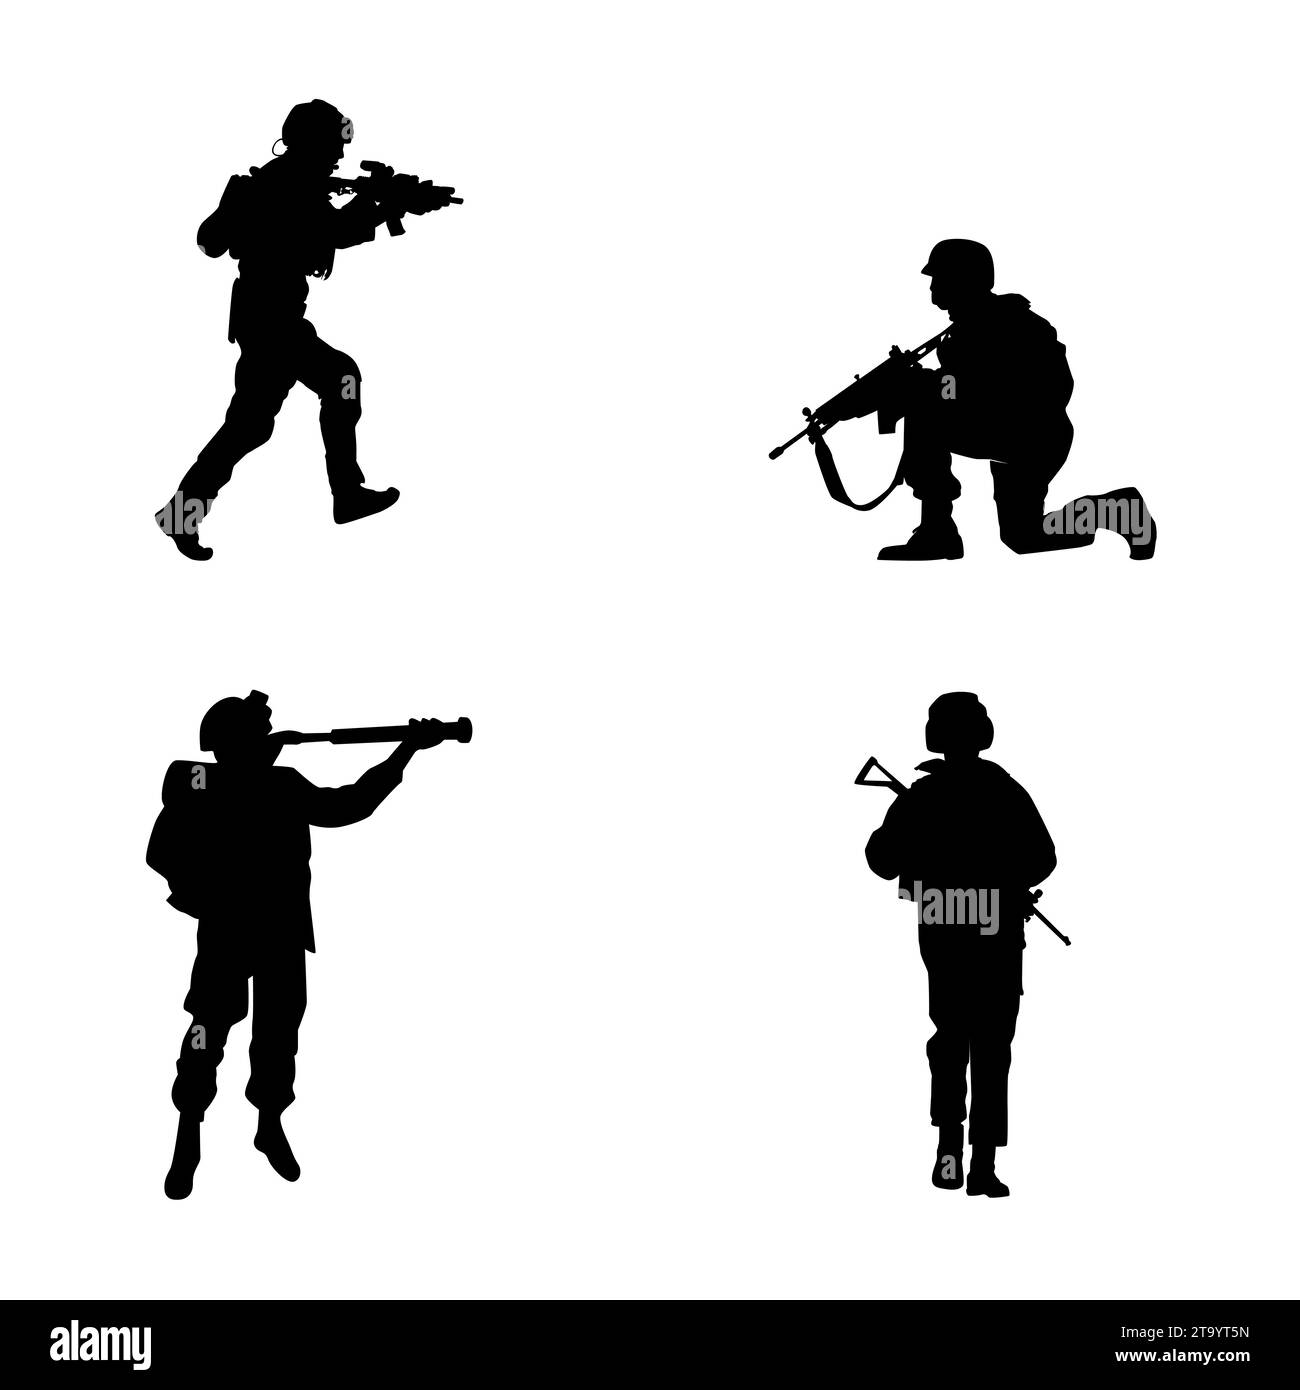 Silhouette of a salute soldier in black and white Stock Vector